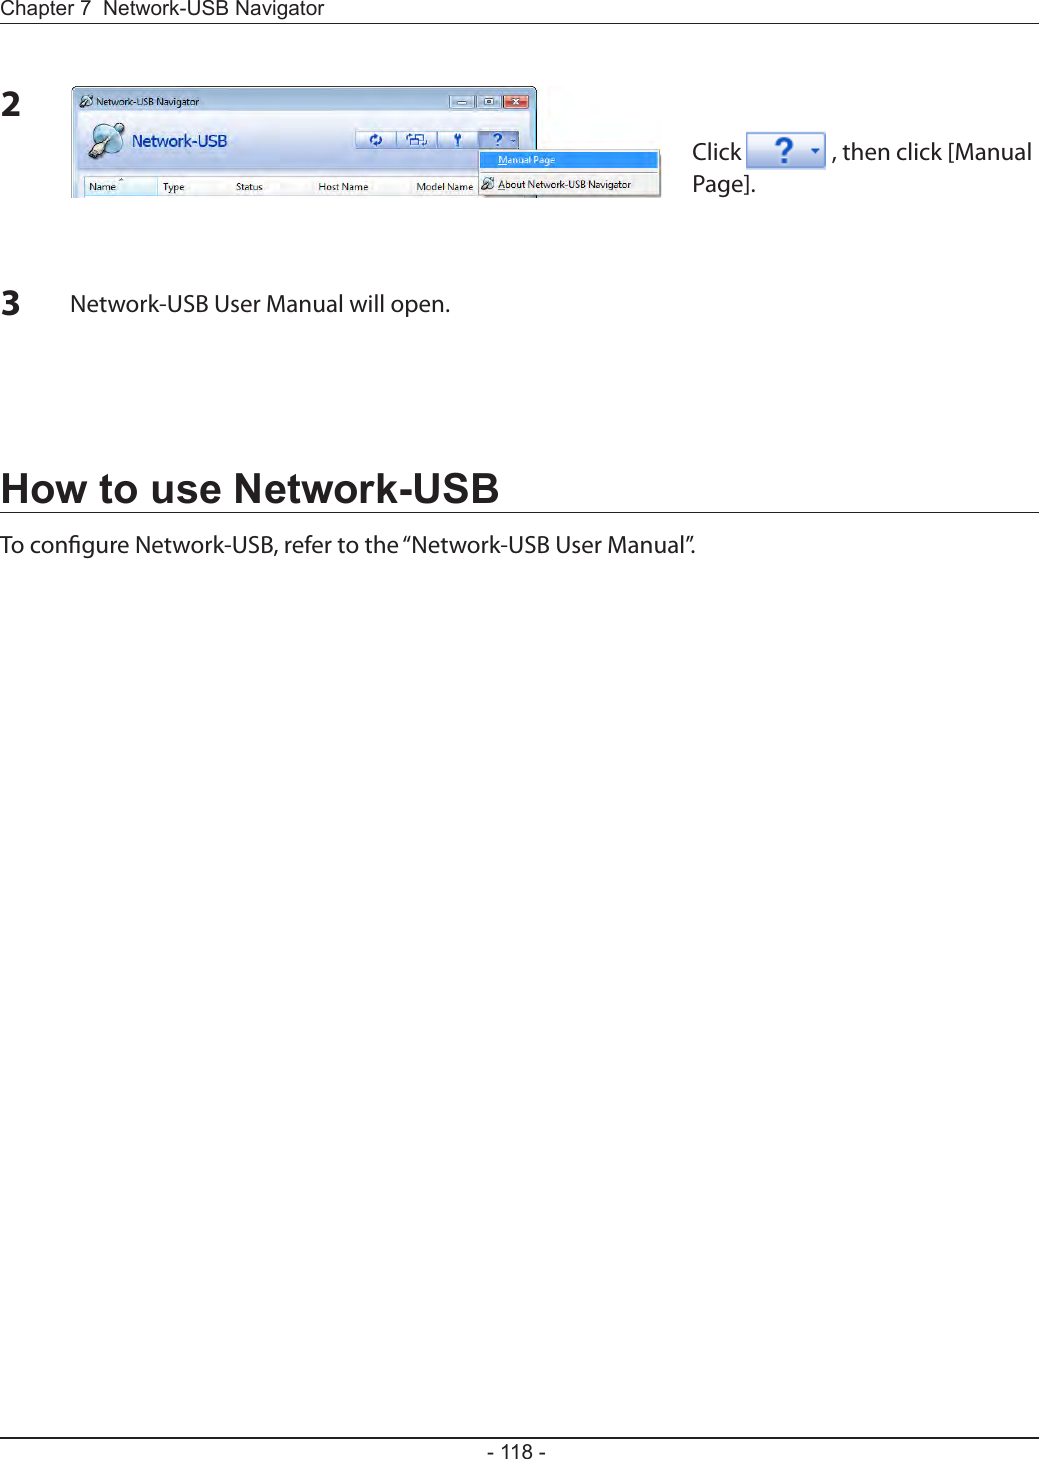 - 118 -Chapter 7  Network-USB NavigatorHow to use Network-USBTo congure Network-USB, refer to the “Network-USB User Manual”.2Click   , then click [Manual Page]. 3Network-USB User Manual will open.